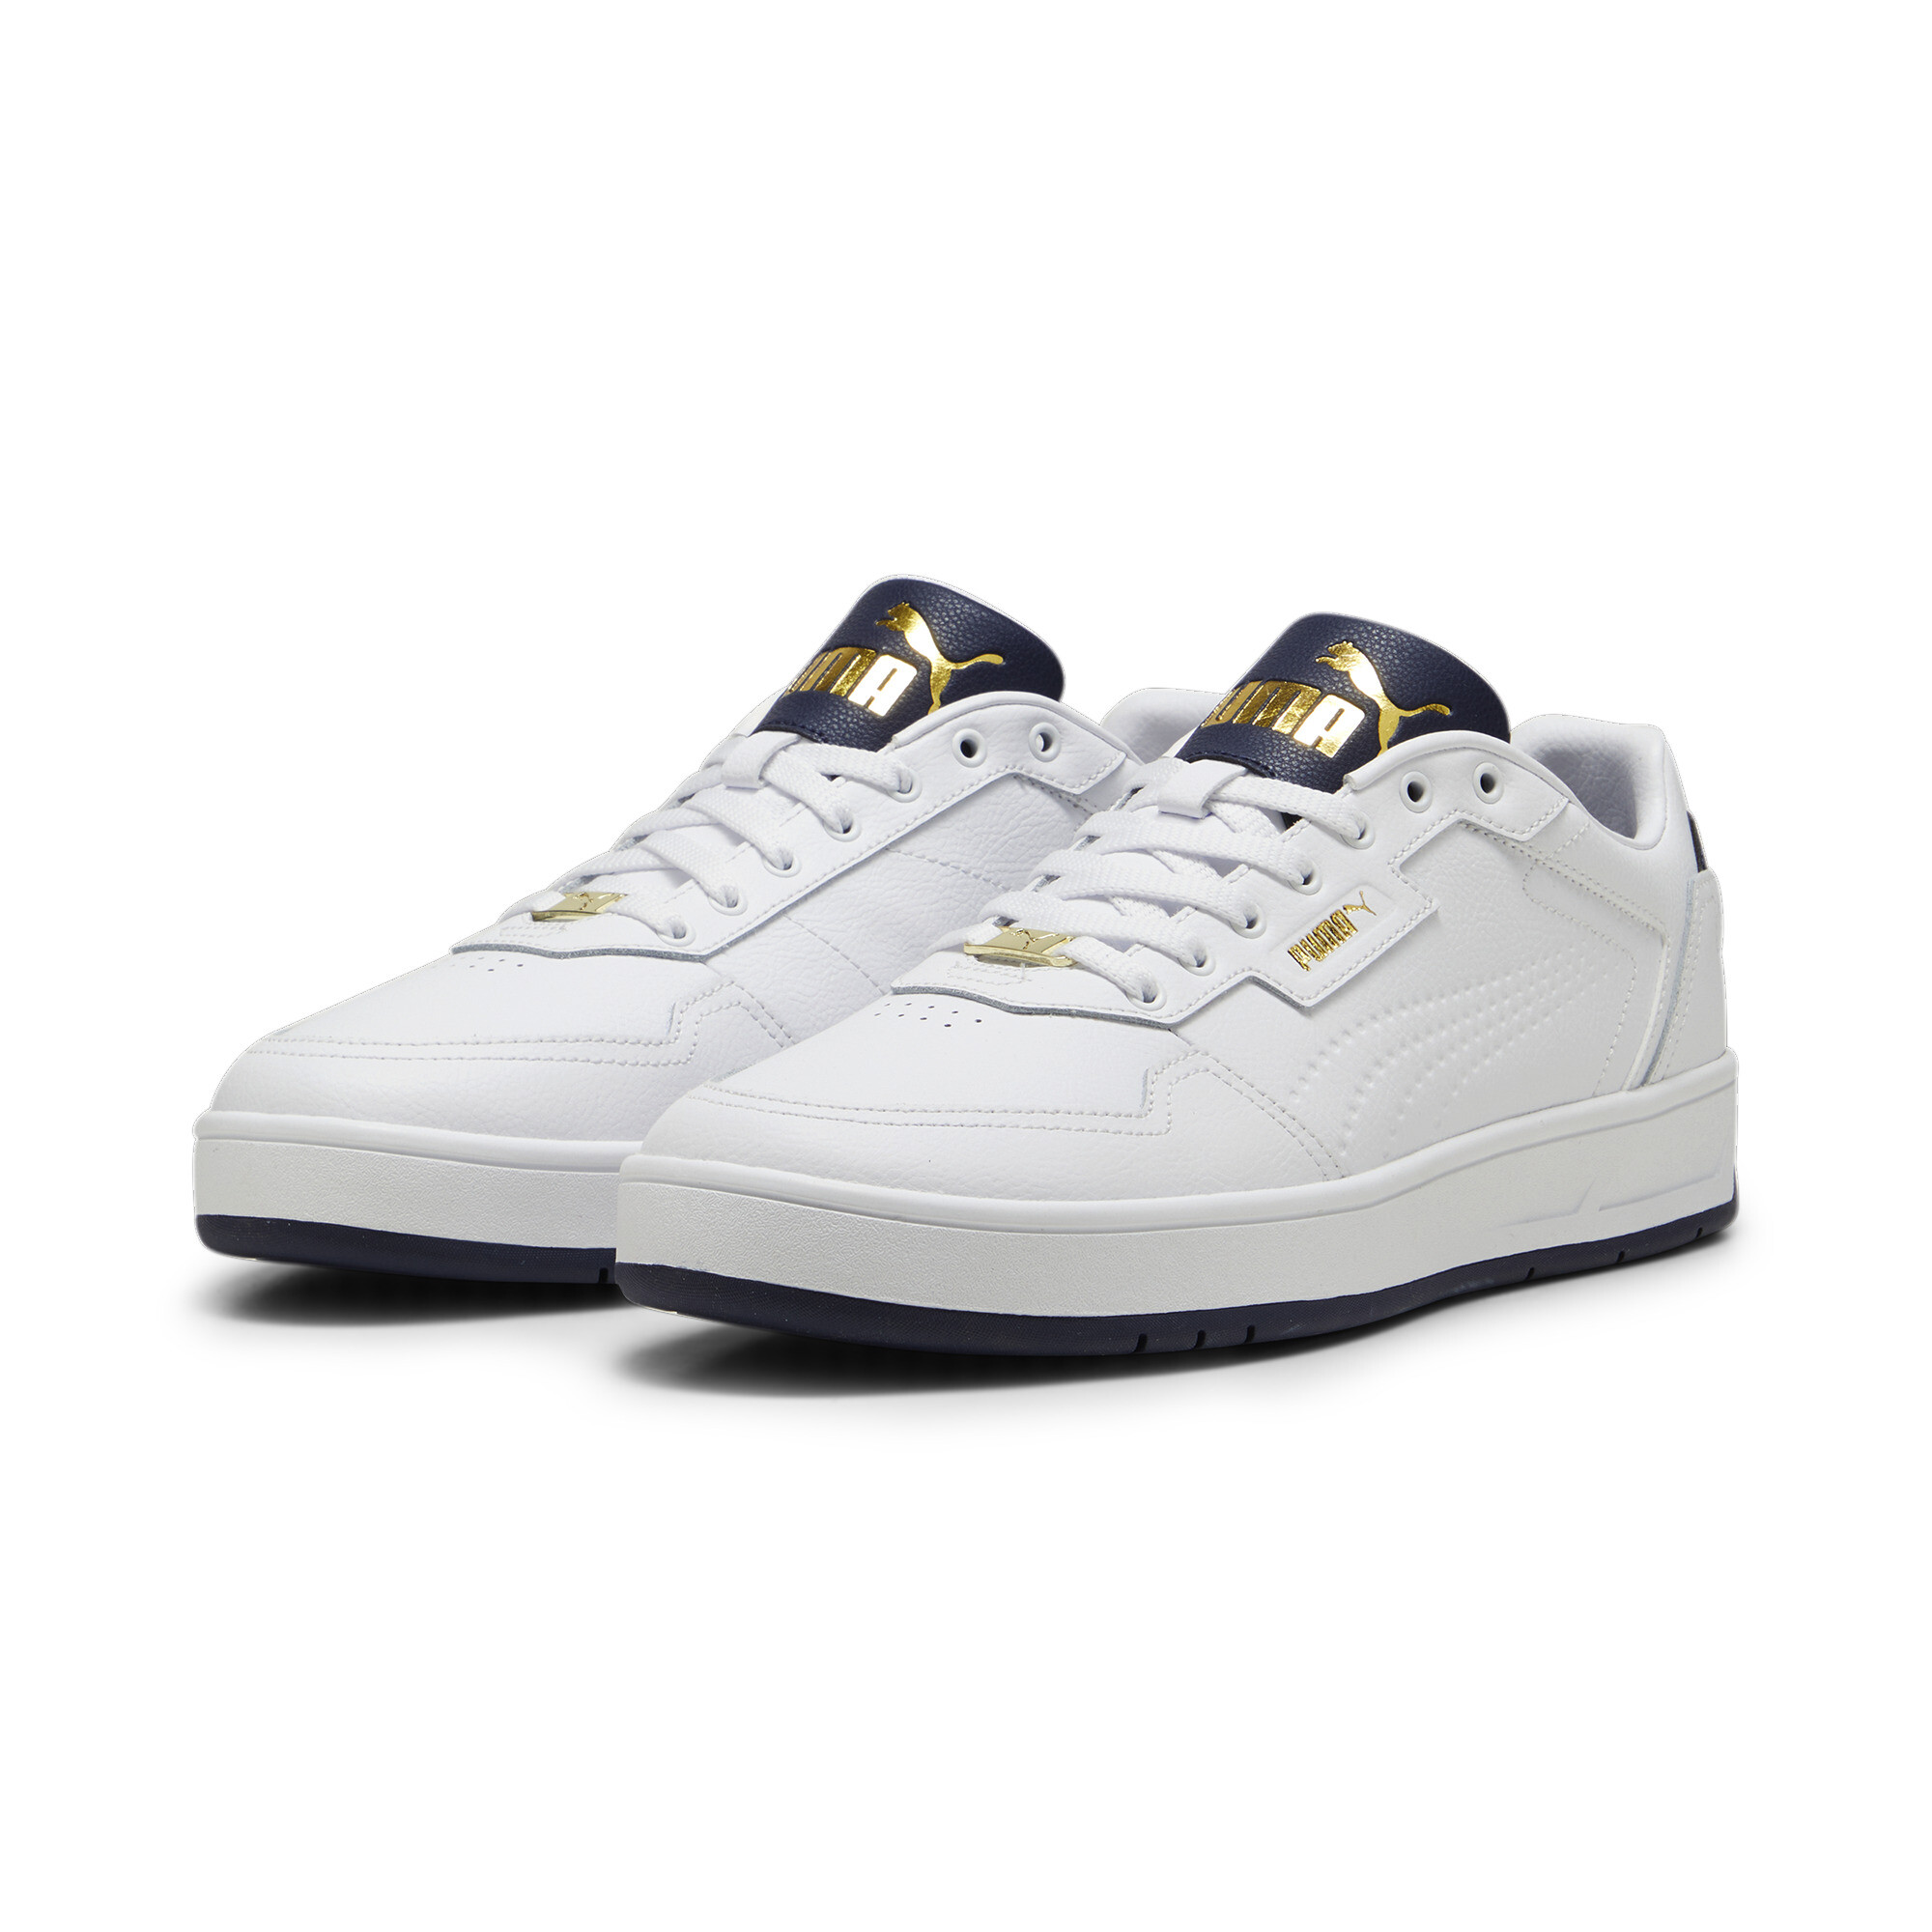 Puma Court Classic Lux Sneakers, White, Size 42.5, Shoes